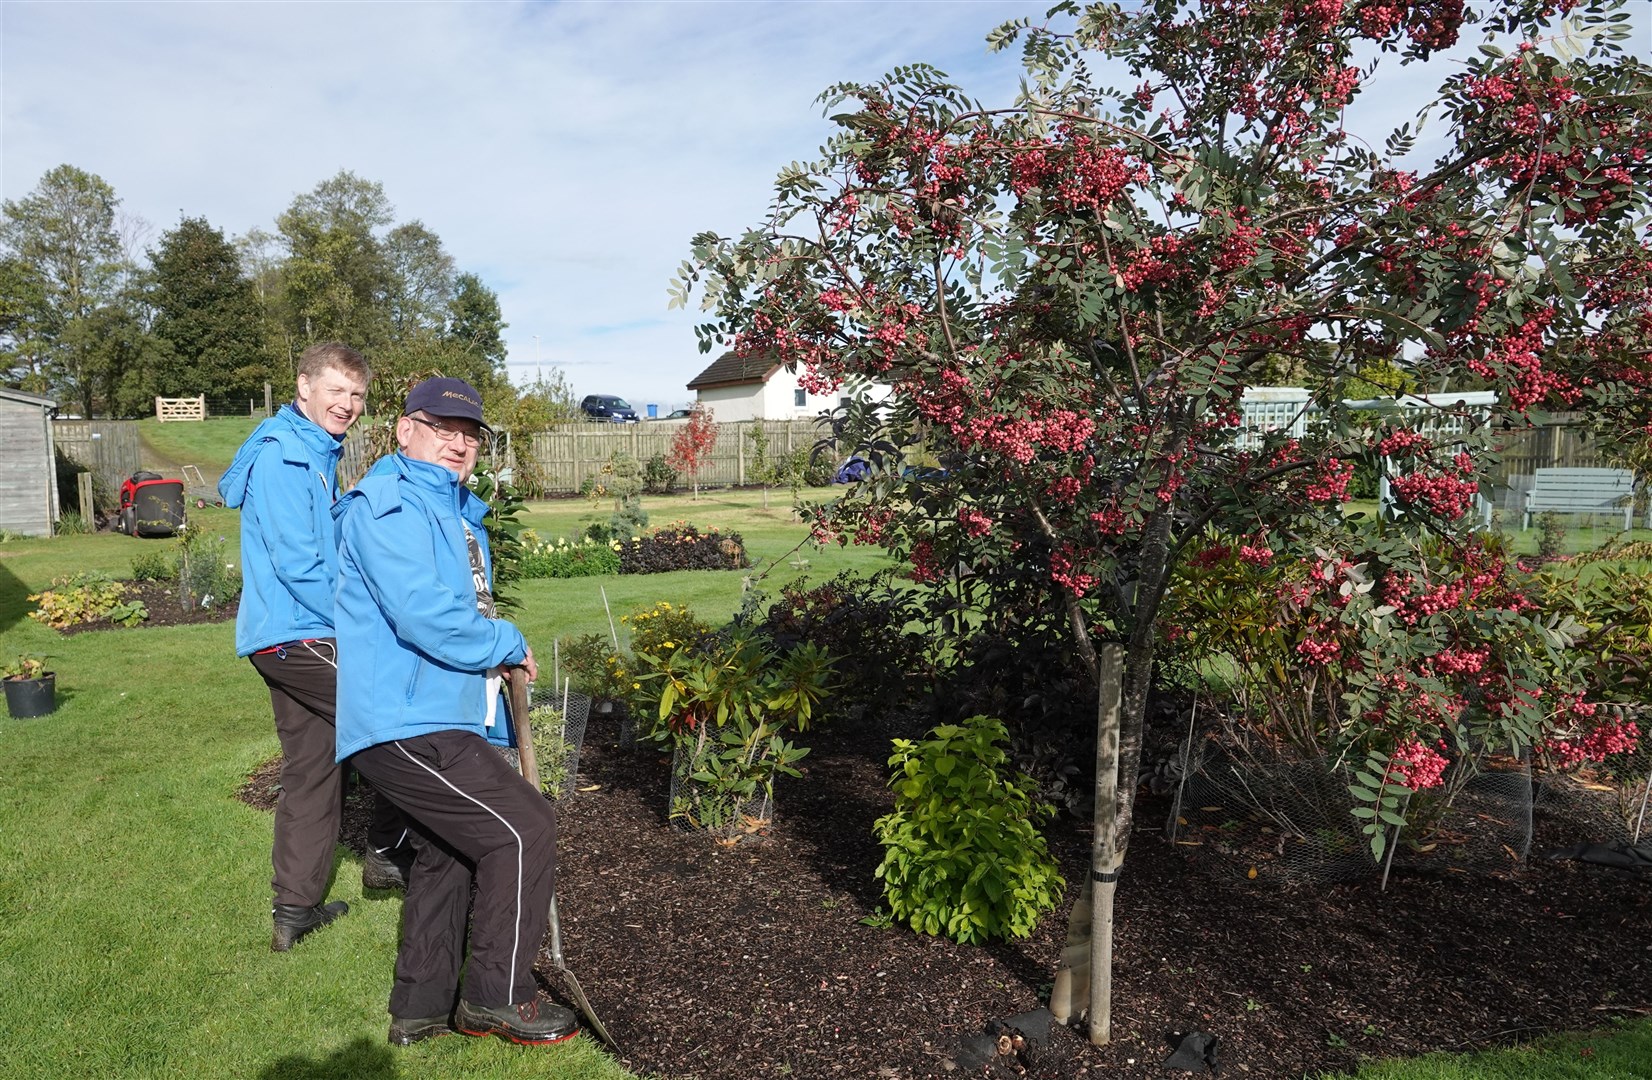 Blooming Gardeners helps adults with learning disabilities enjoy and develop their awareness of horticulture and nature.